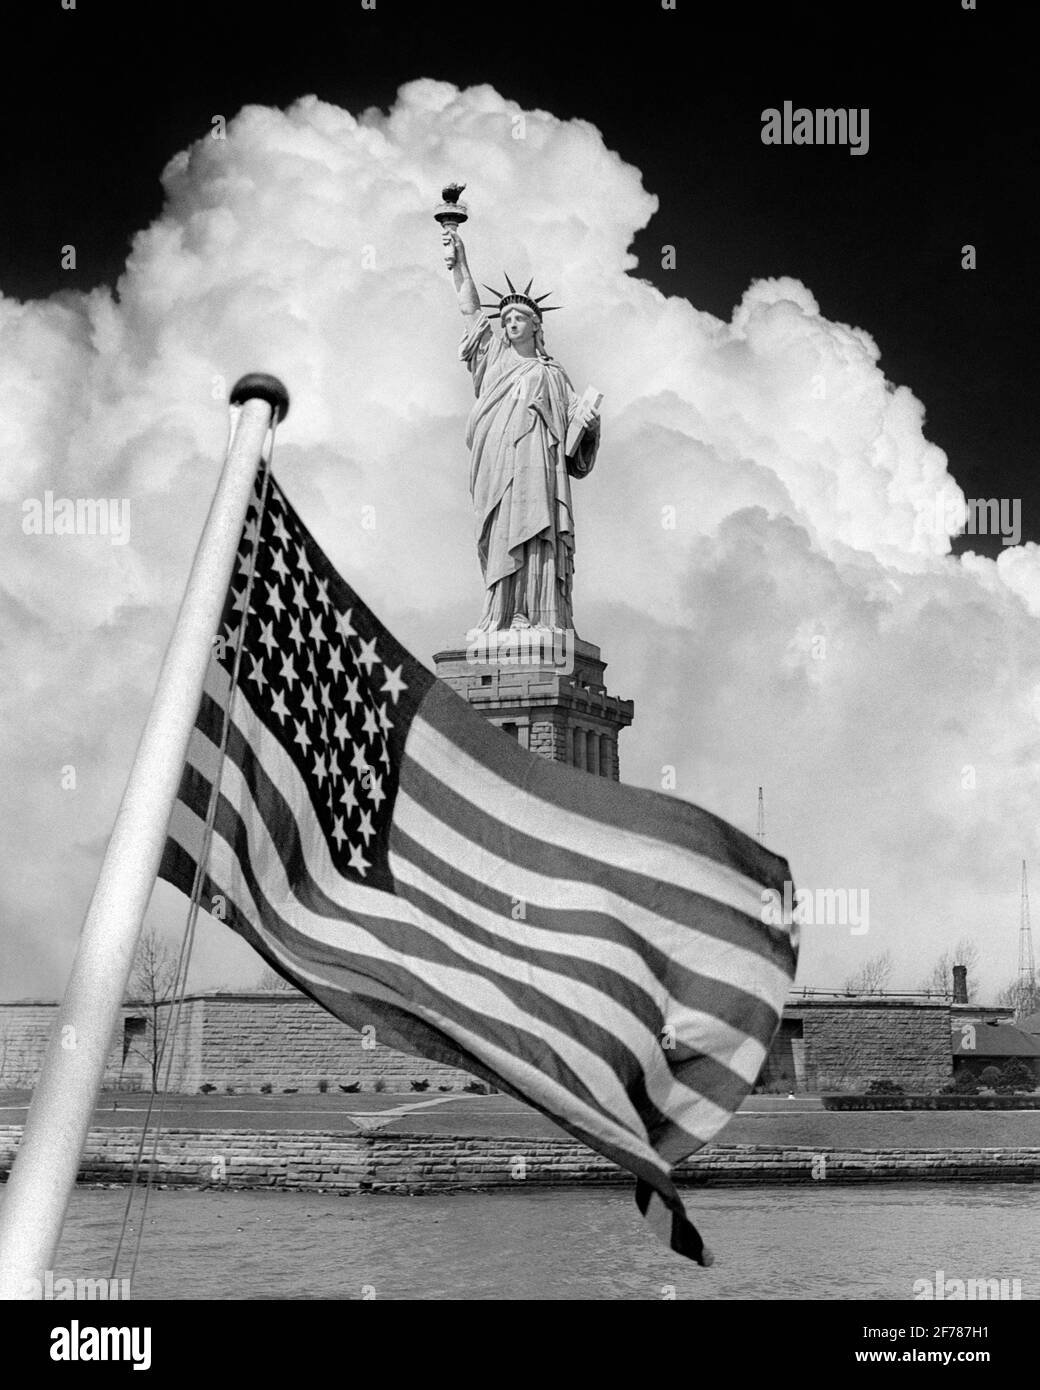 1940s COMPOSITE IMAGE OF STATUE OF LIBERTY WITH DRAMATIC CLOUD BEHIND AND 48 STAR AMERICAN FLAG OVERLAY IN FOREGROUND - h1437 HAR001 HARS NYC PATRIOT NEW YORK CITIES OVERLAY PATRIOTIC STARS AND STRIPES WORLD WAR 2 GUSTAVE EIFFEL NEW YORK CITY SYMBOLIC COPPER DEMOCRACY FRAMEWORK FREDERIC AUGUSTE BARTHOLDI PATRIOTISM RED WHITE AND BLUE STATUE OF LIBERTY BLACK AND WHITE FOREGROUND HAR001 ICONIC OLD FASHIONED Stock Photo